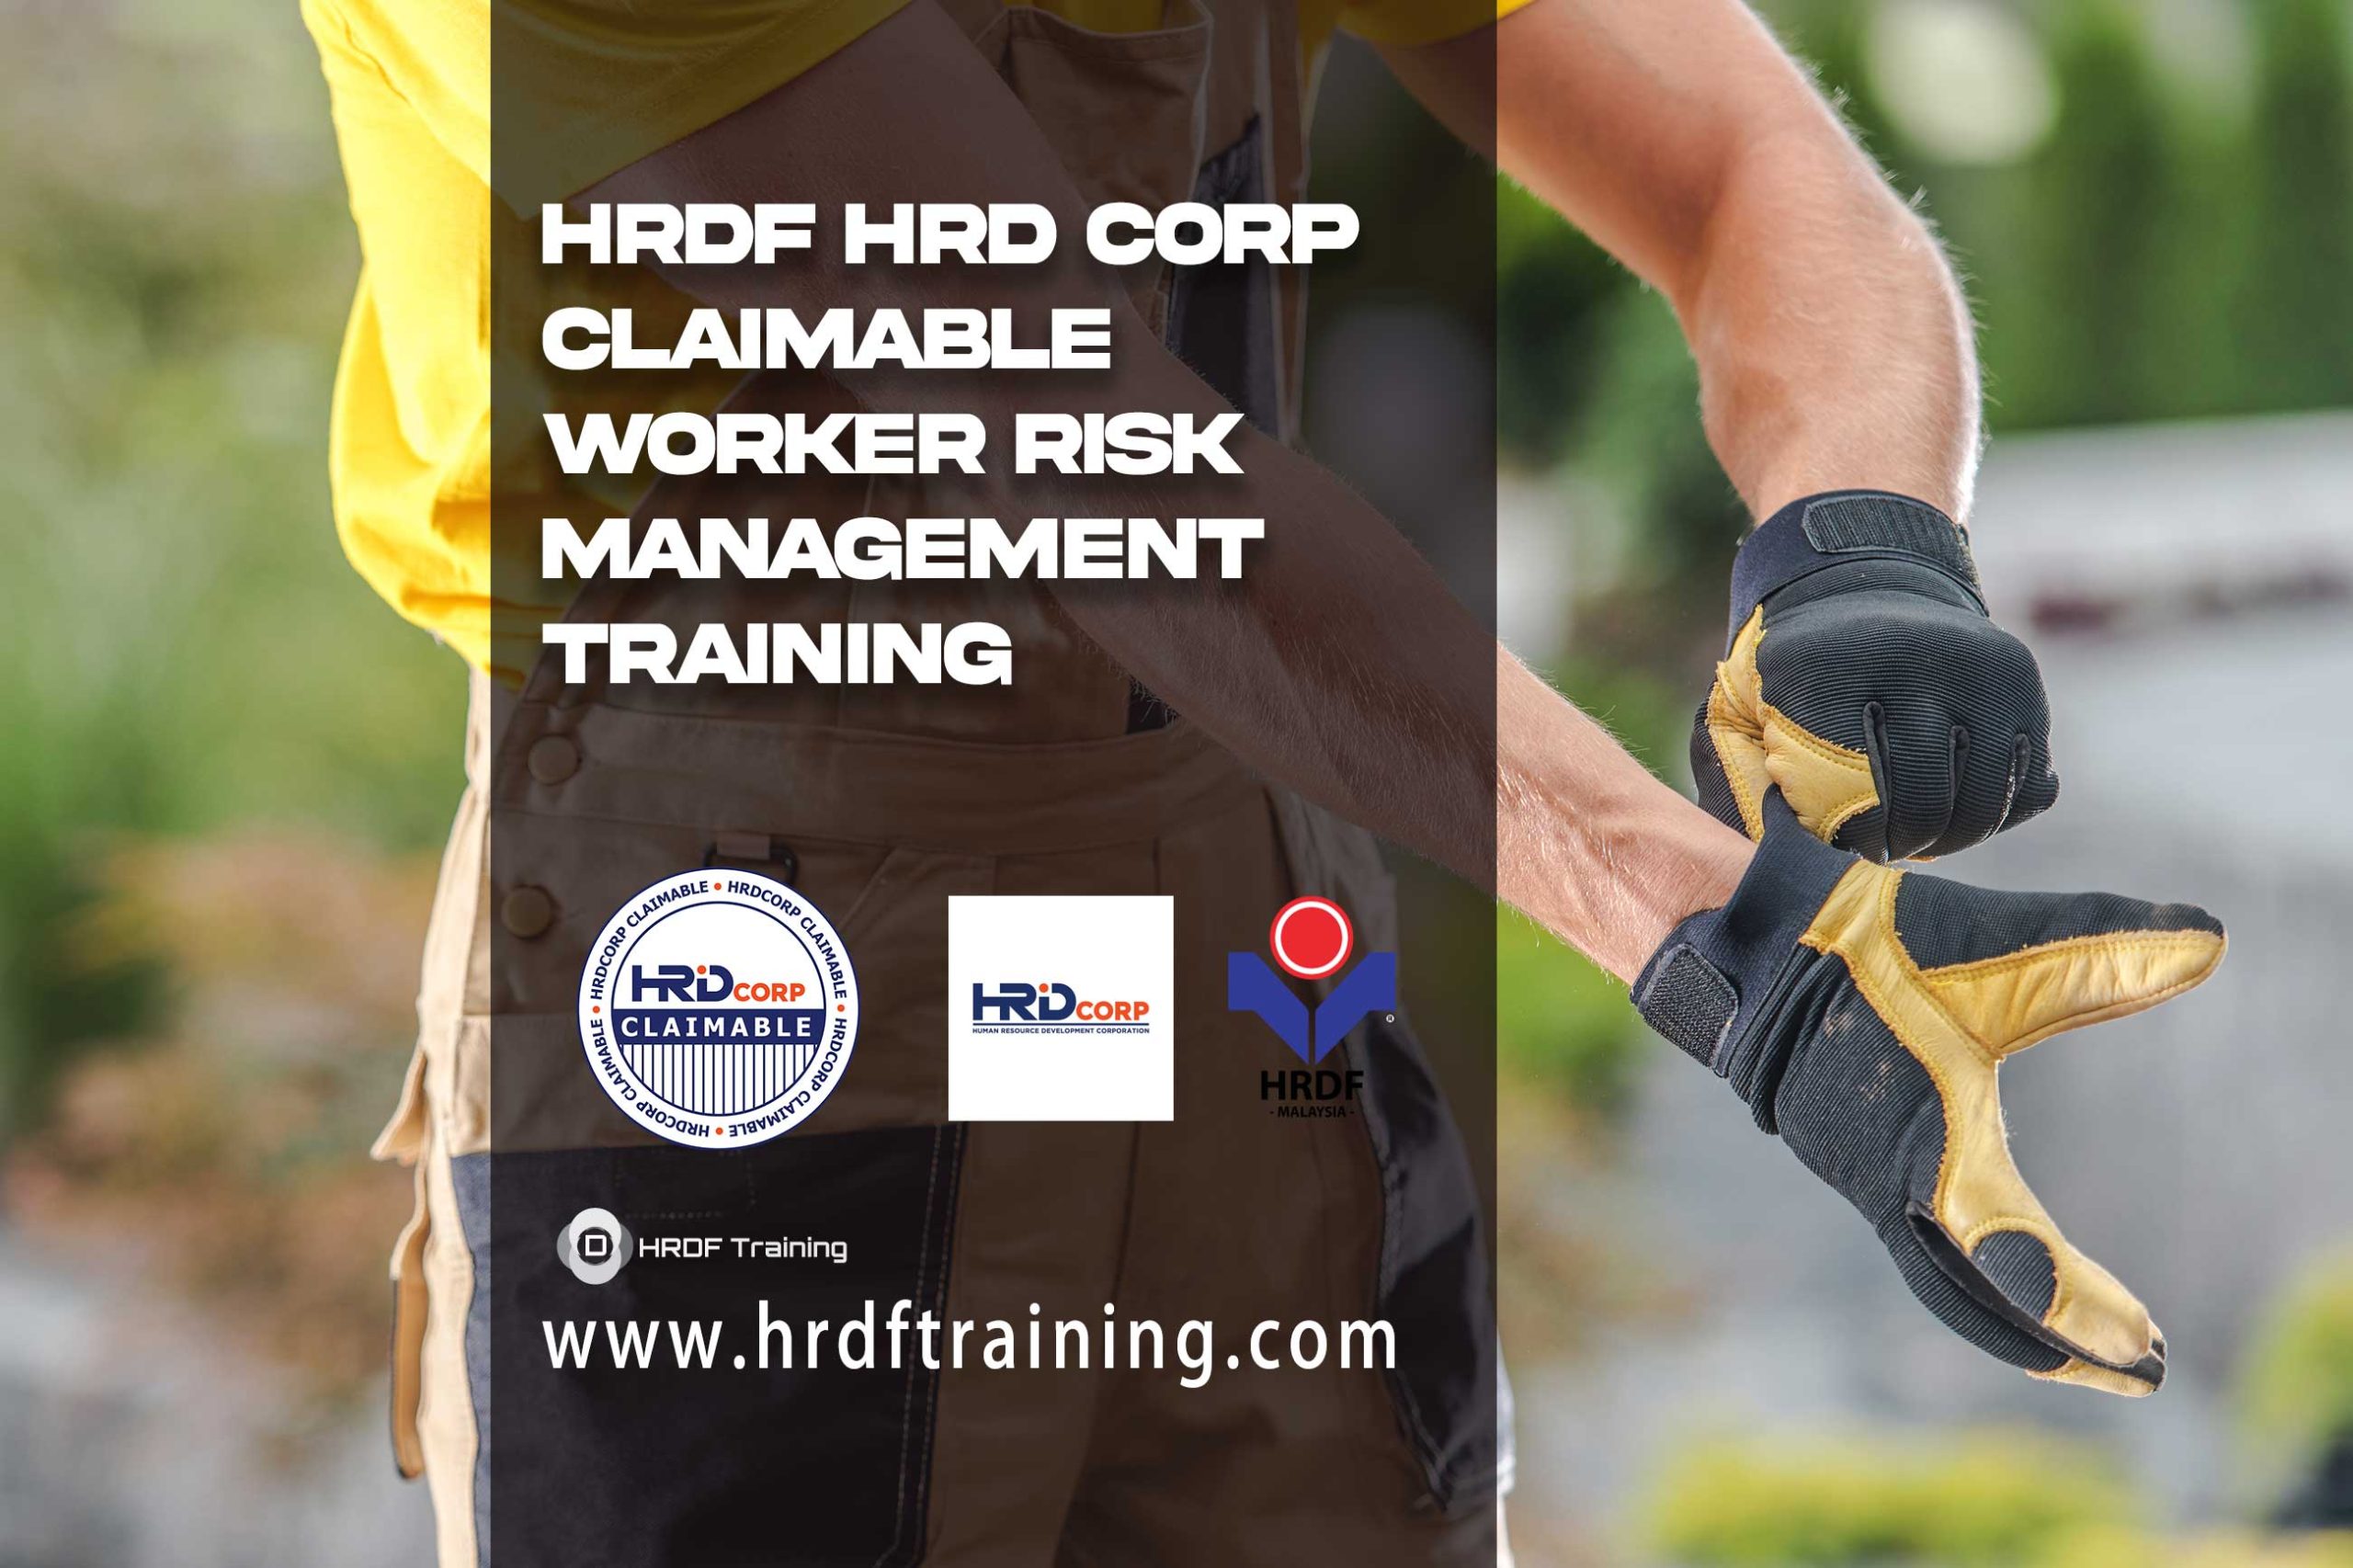 HRDF-HRD-Corp-Claimable-Worker-Risk-Management-Training